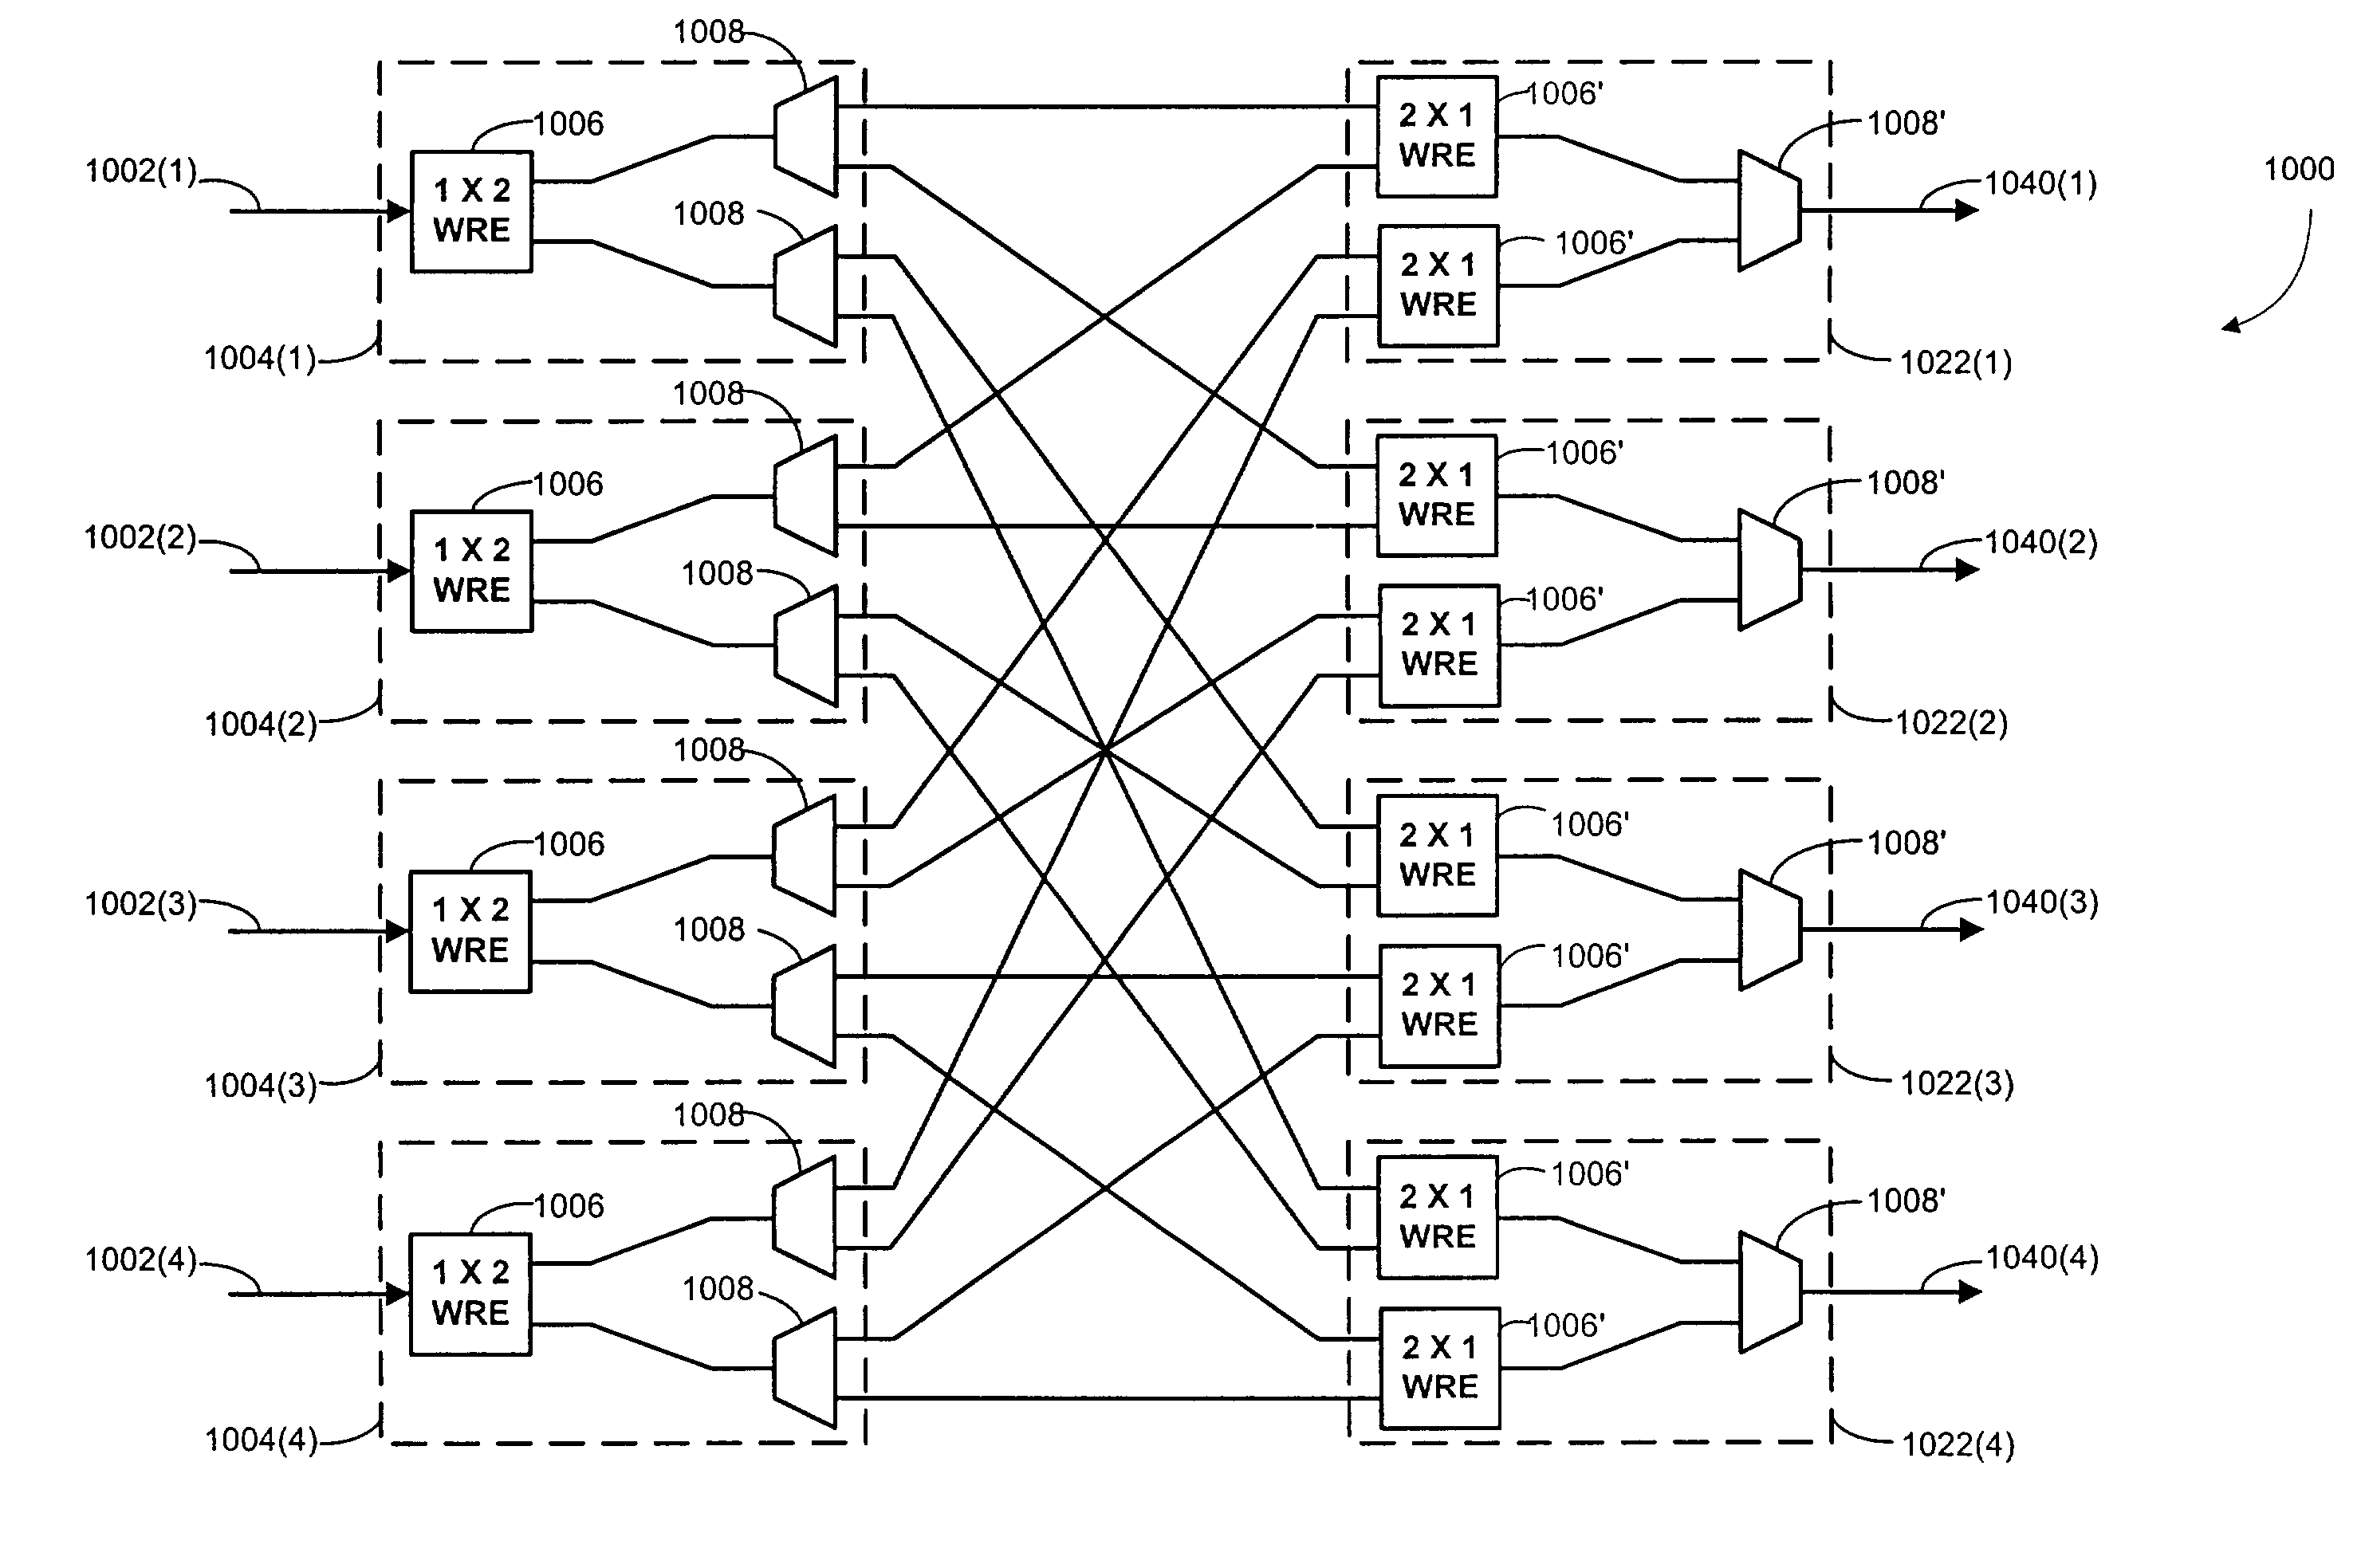 Optical wavelength cross connect architectures using wavelength routing elements